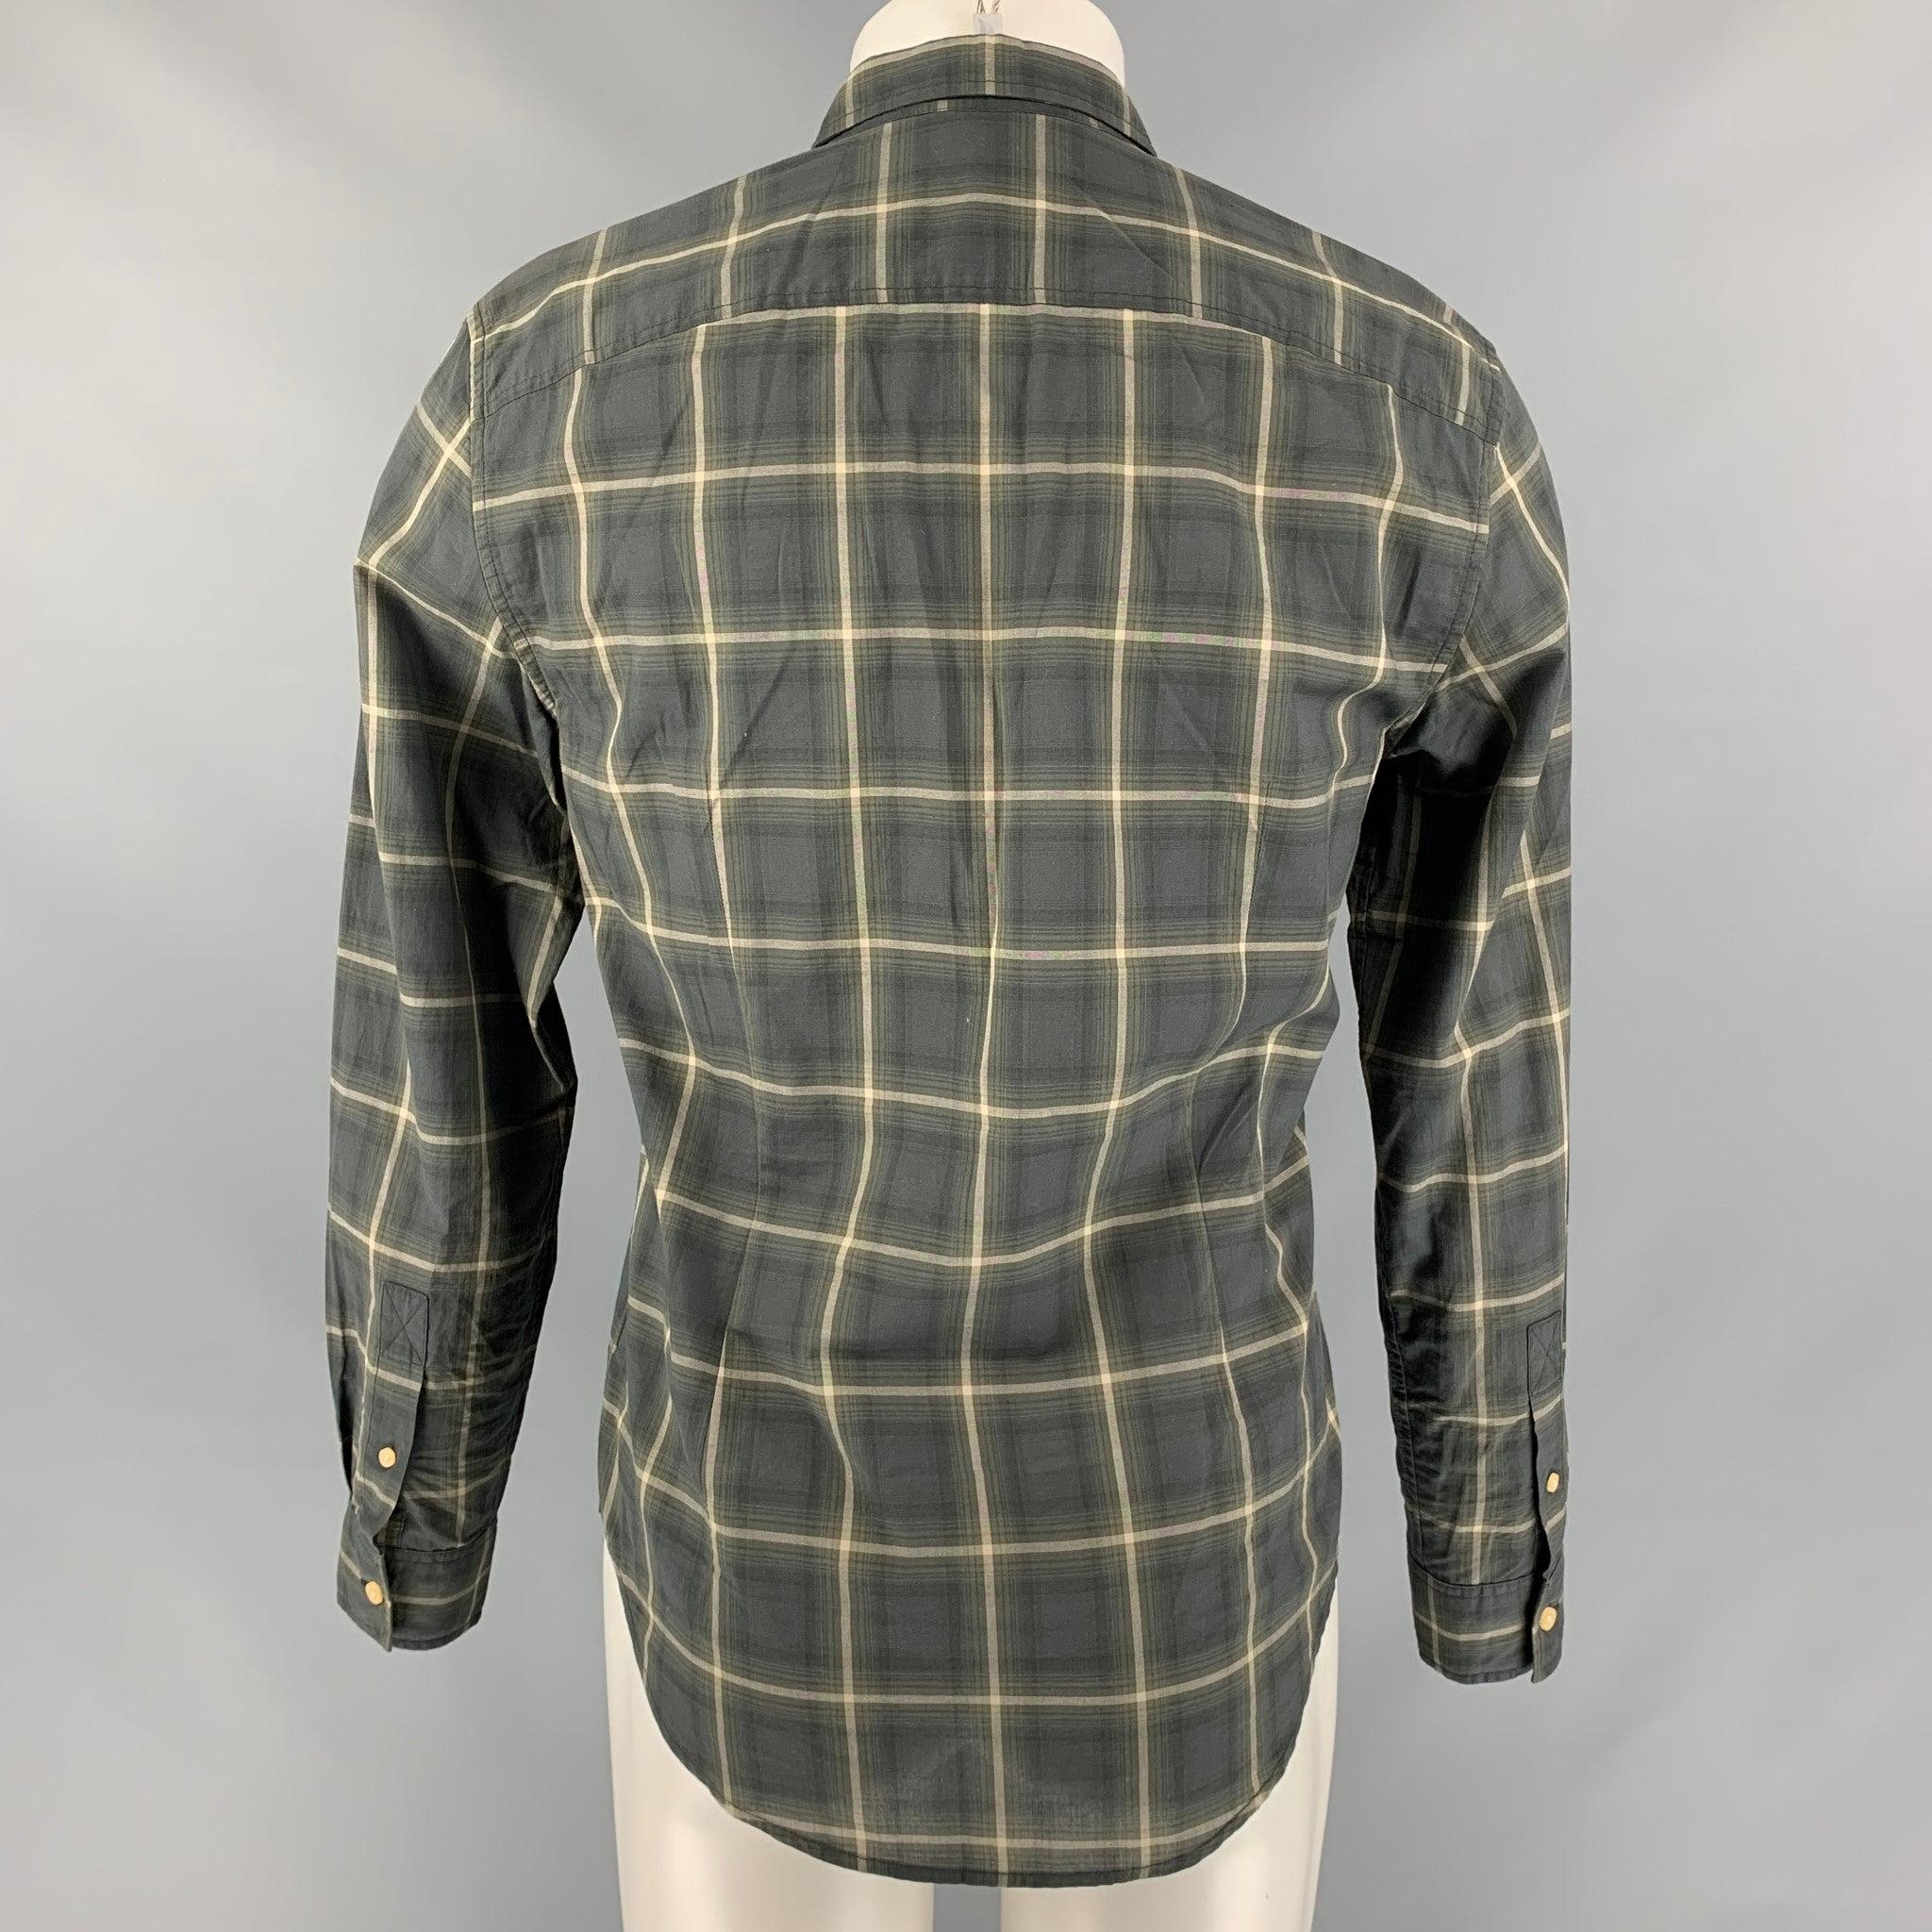 JOHN VARVATOS Size S Green & Grey Plaid Cotton Button Up Long Sleeve Shirt In Excellent Condition For Sale In San Francisco, CA